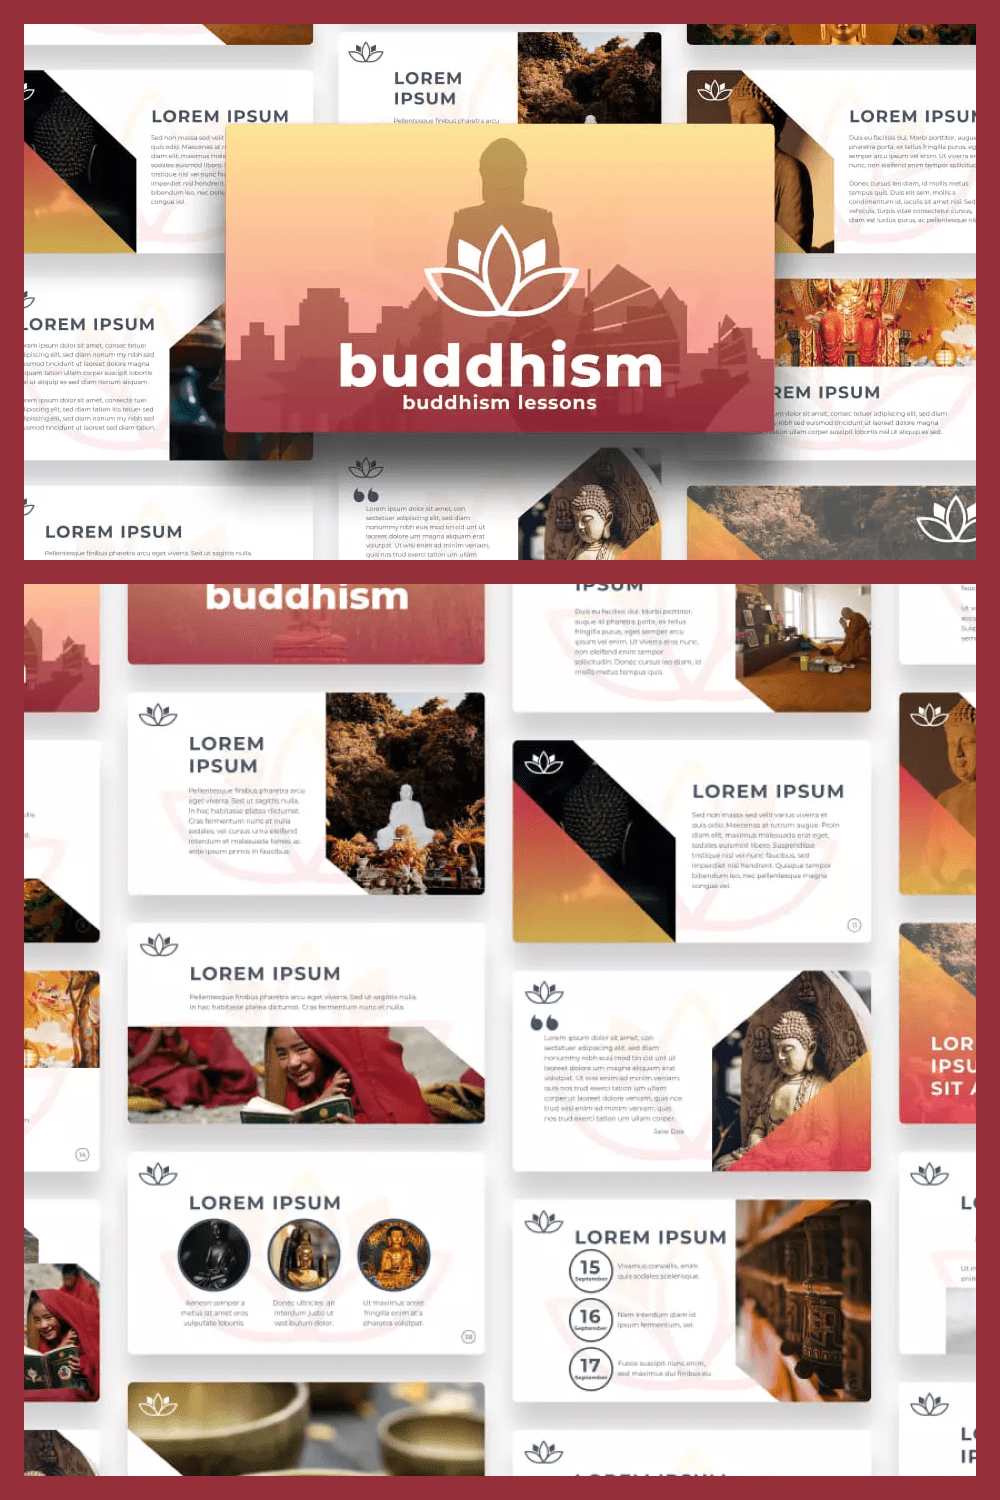 Presentation pages in yellow tones on the theme of Buddhism.